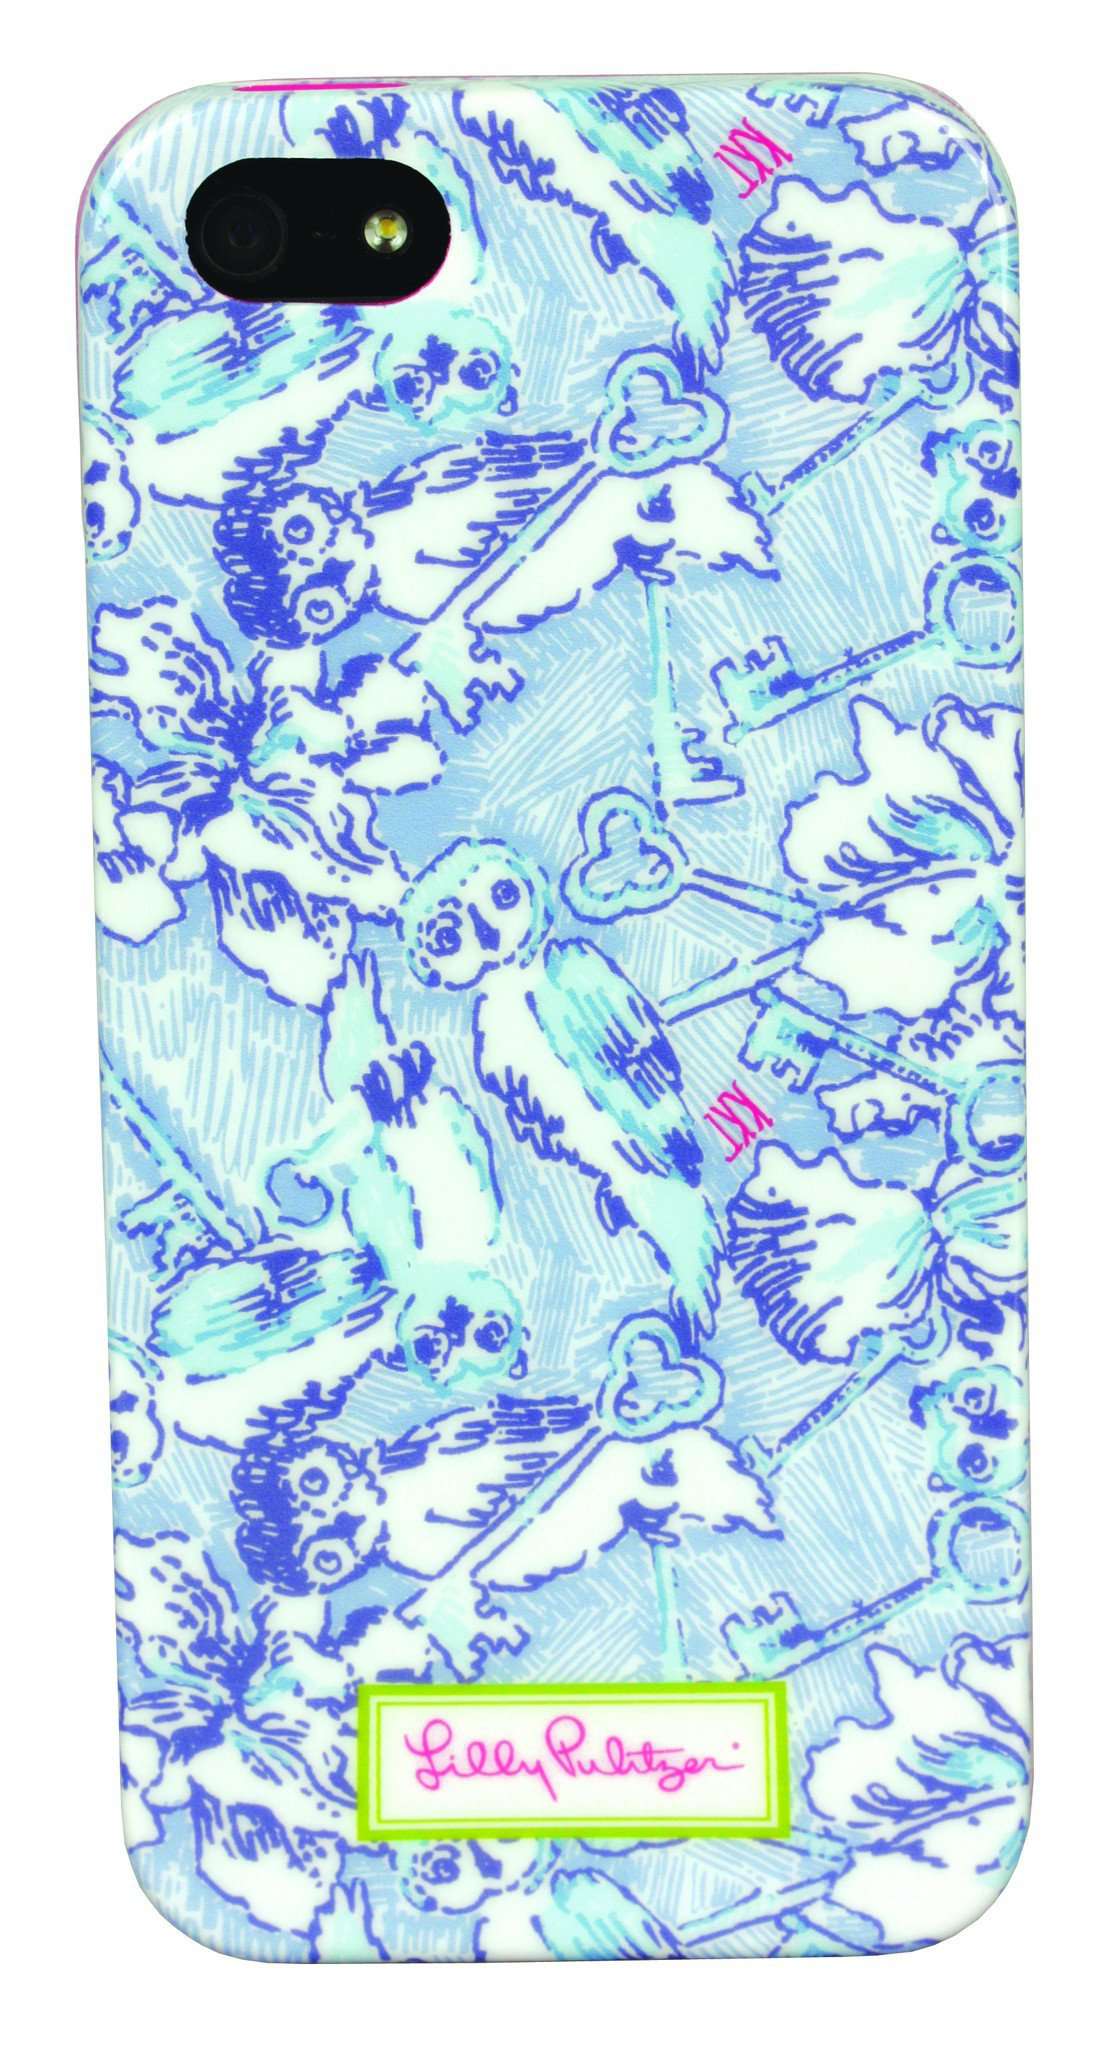 Kappa Kappa Gamma iPhone 5/5s Cover by Lilly Pulitzer - Country Club Prep